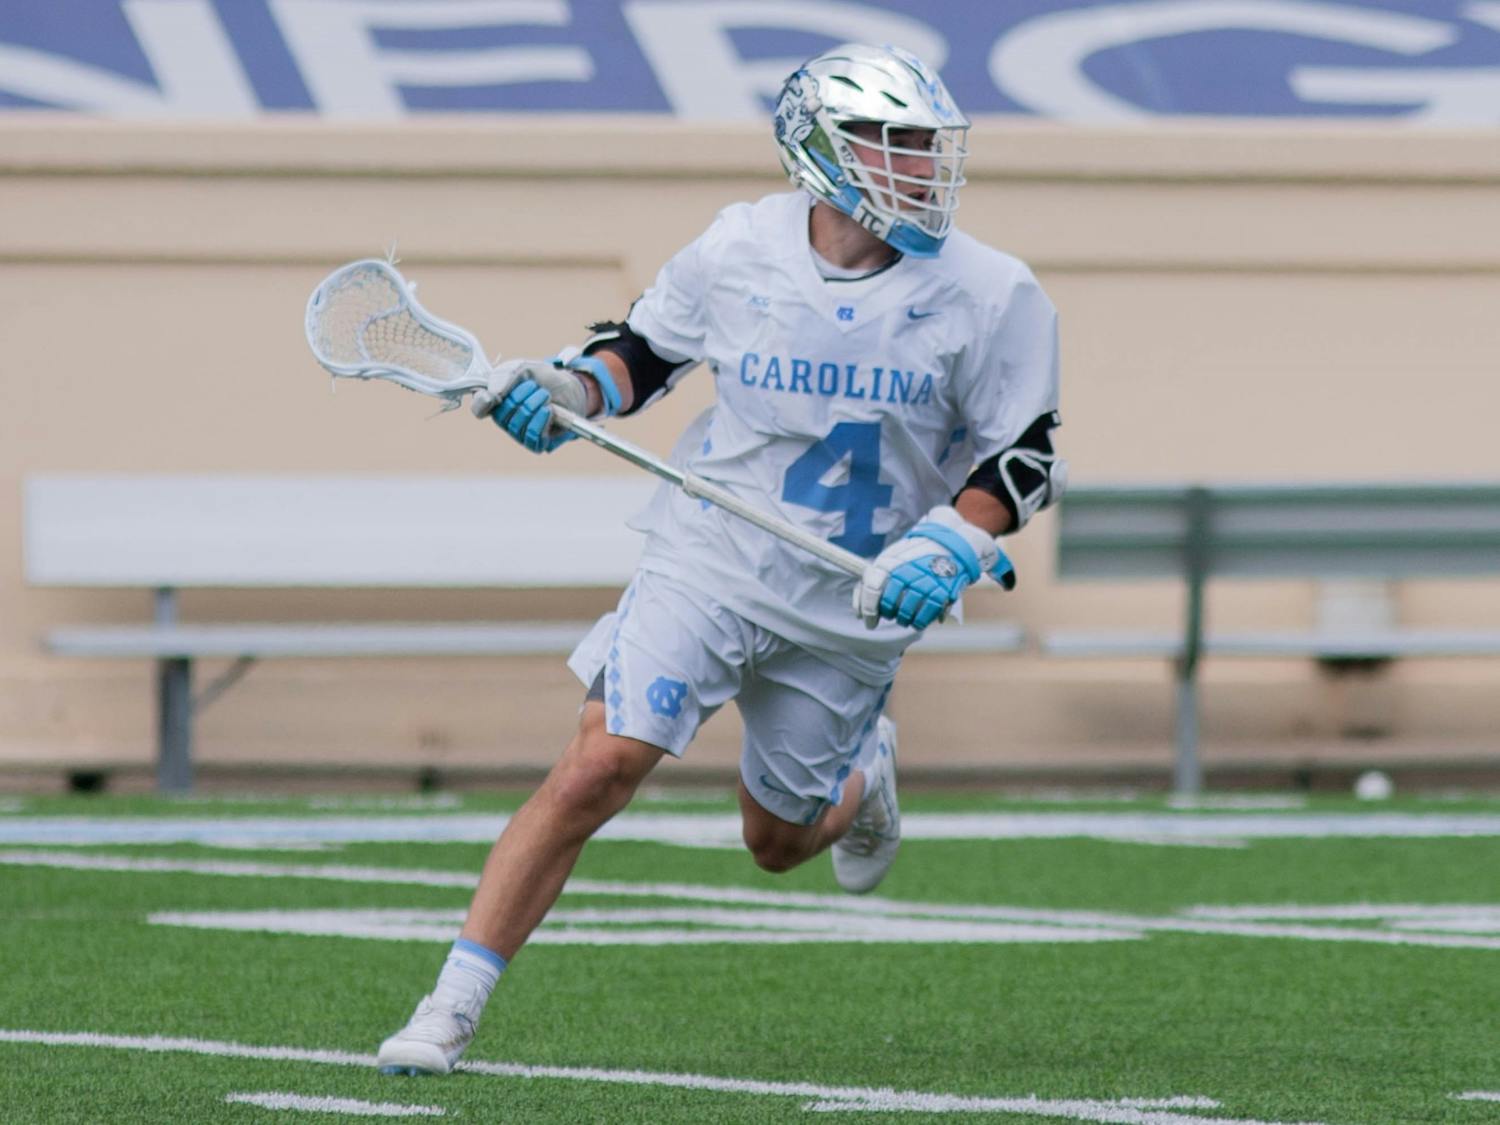 UNC senior attackman Chris Gray (4) prepares to catch the ball during the game against Notre Dame on April 25, 2021 at Kenan Stadium. The Tar Heels' defeated the Fighting Irish 12-10.